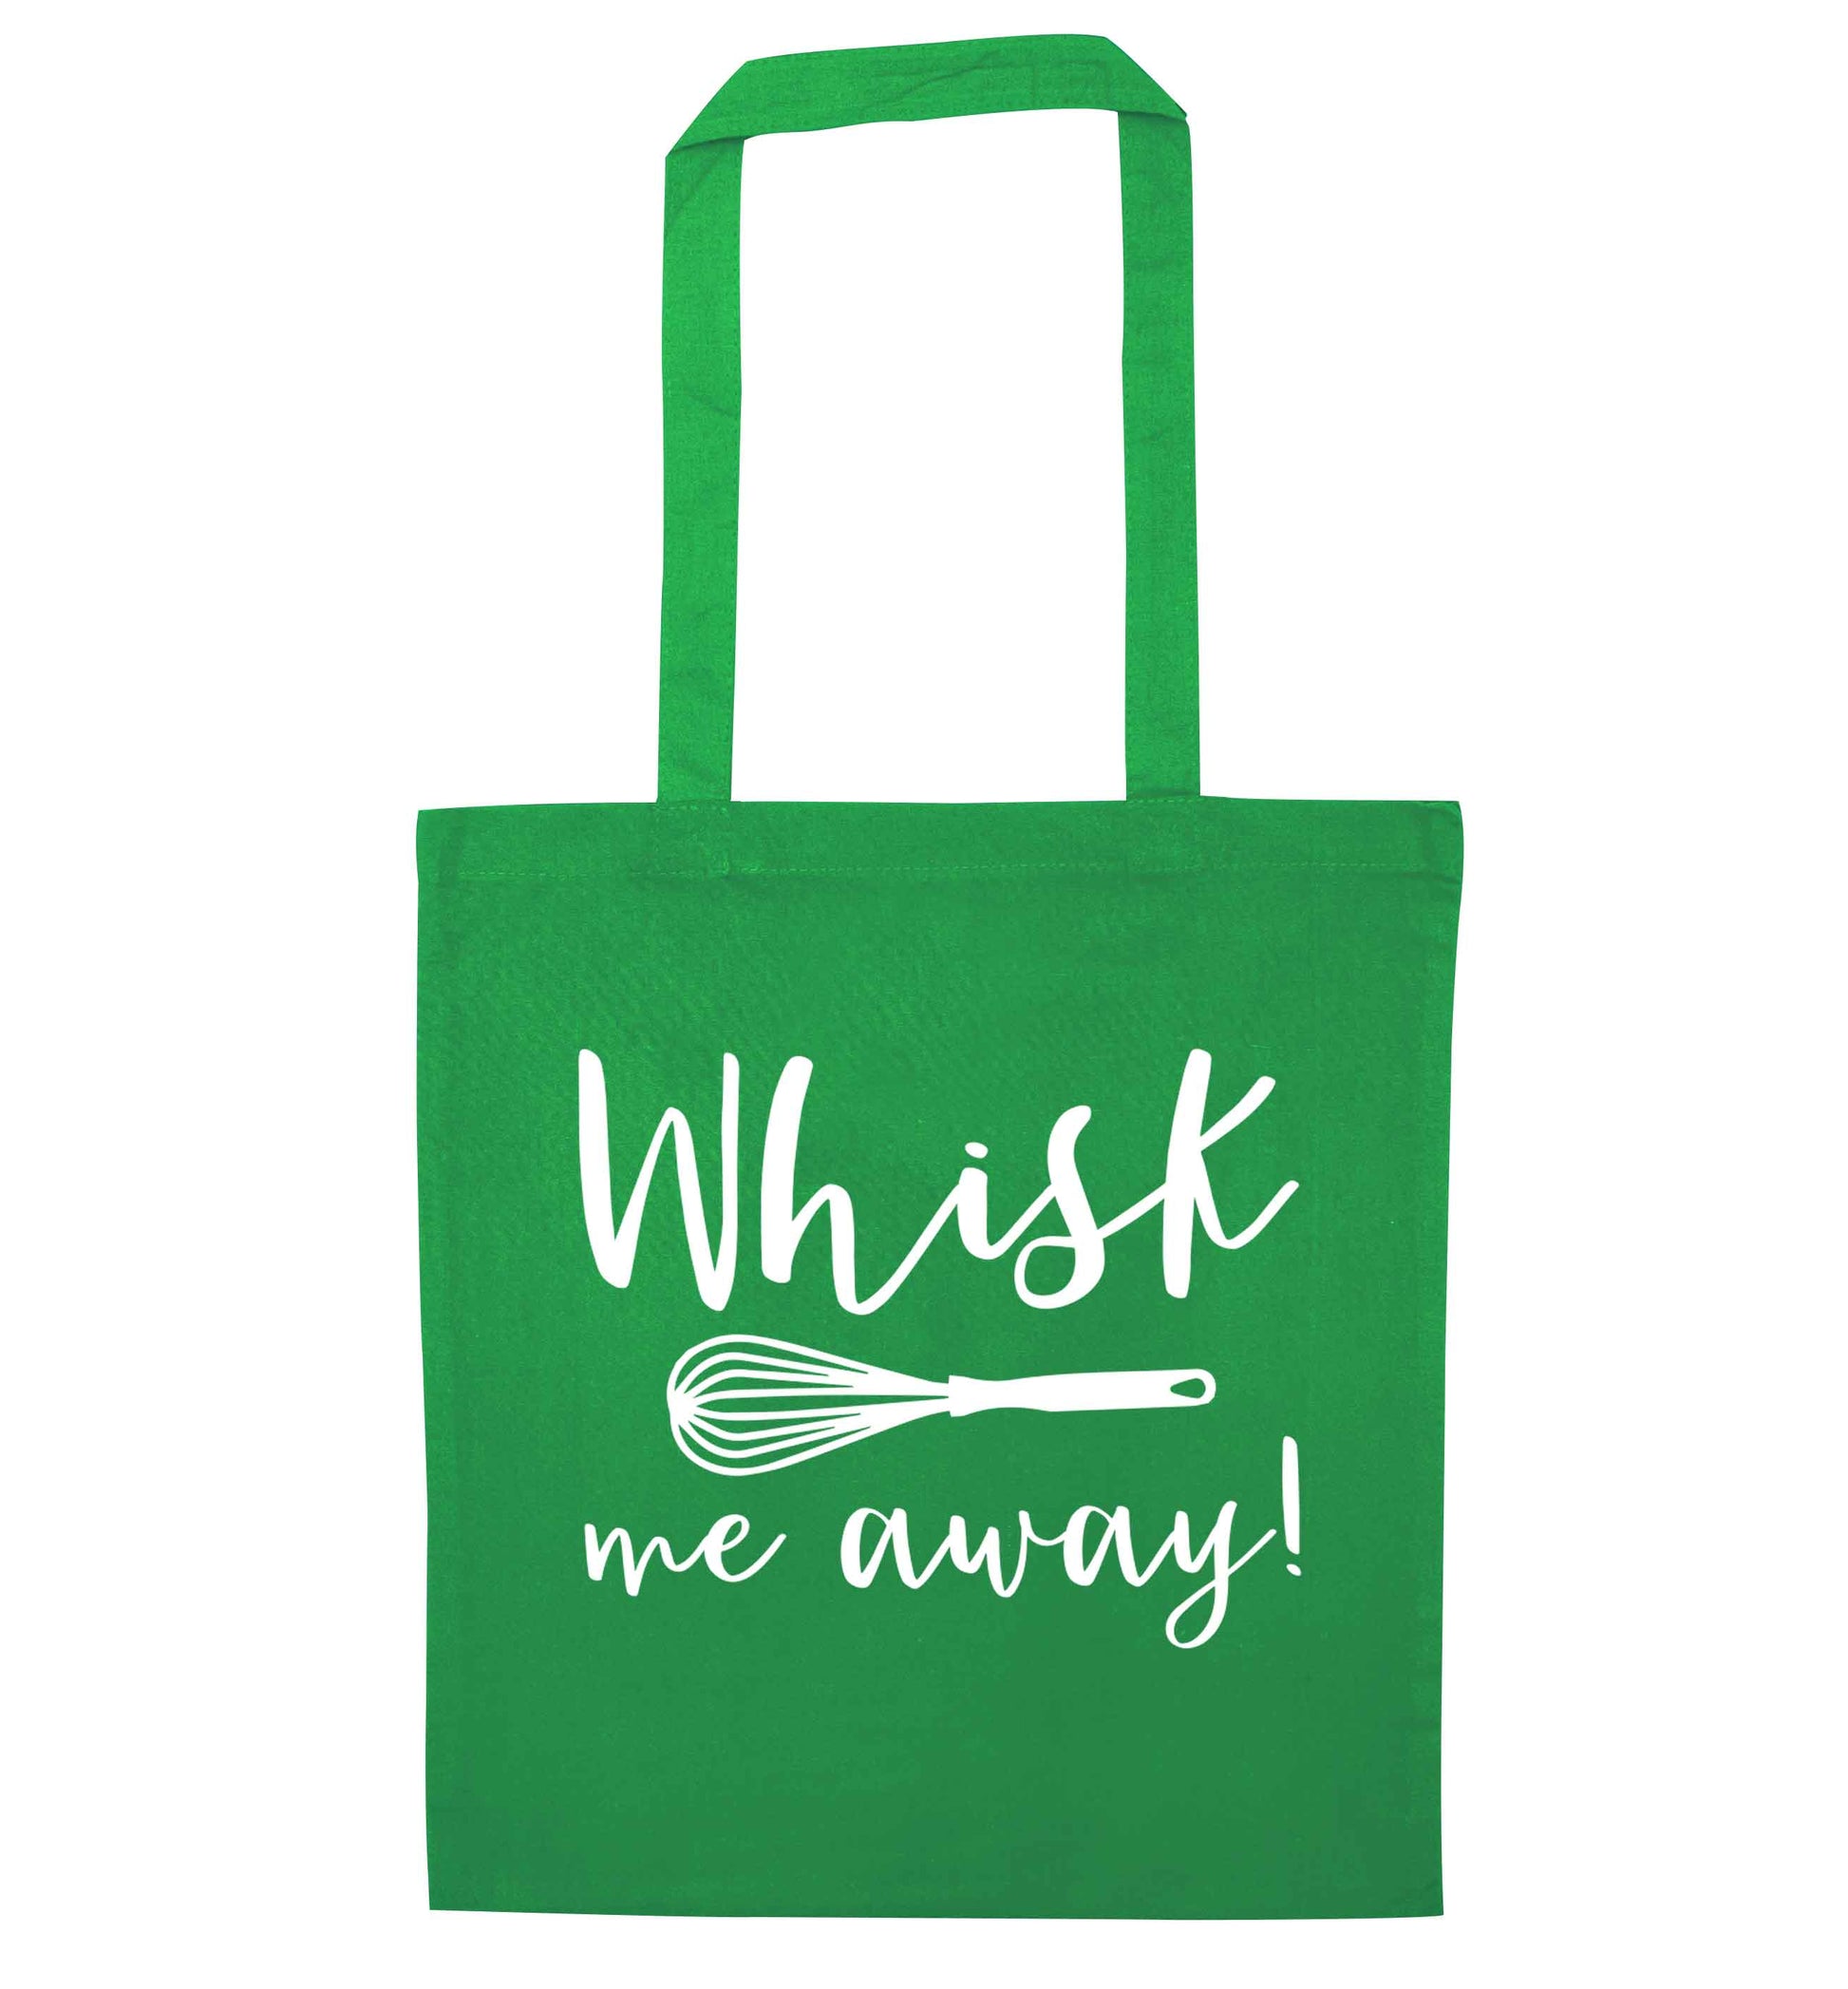 Whisk me away green tote bag